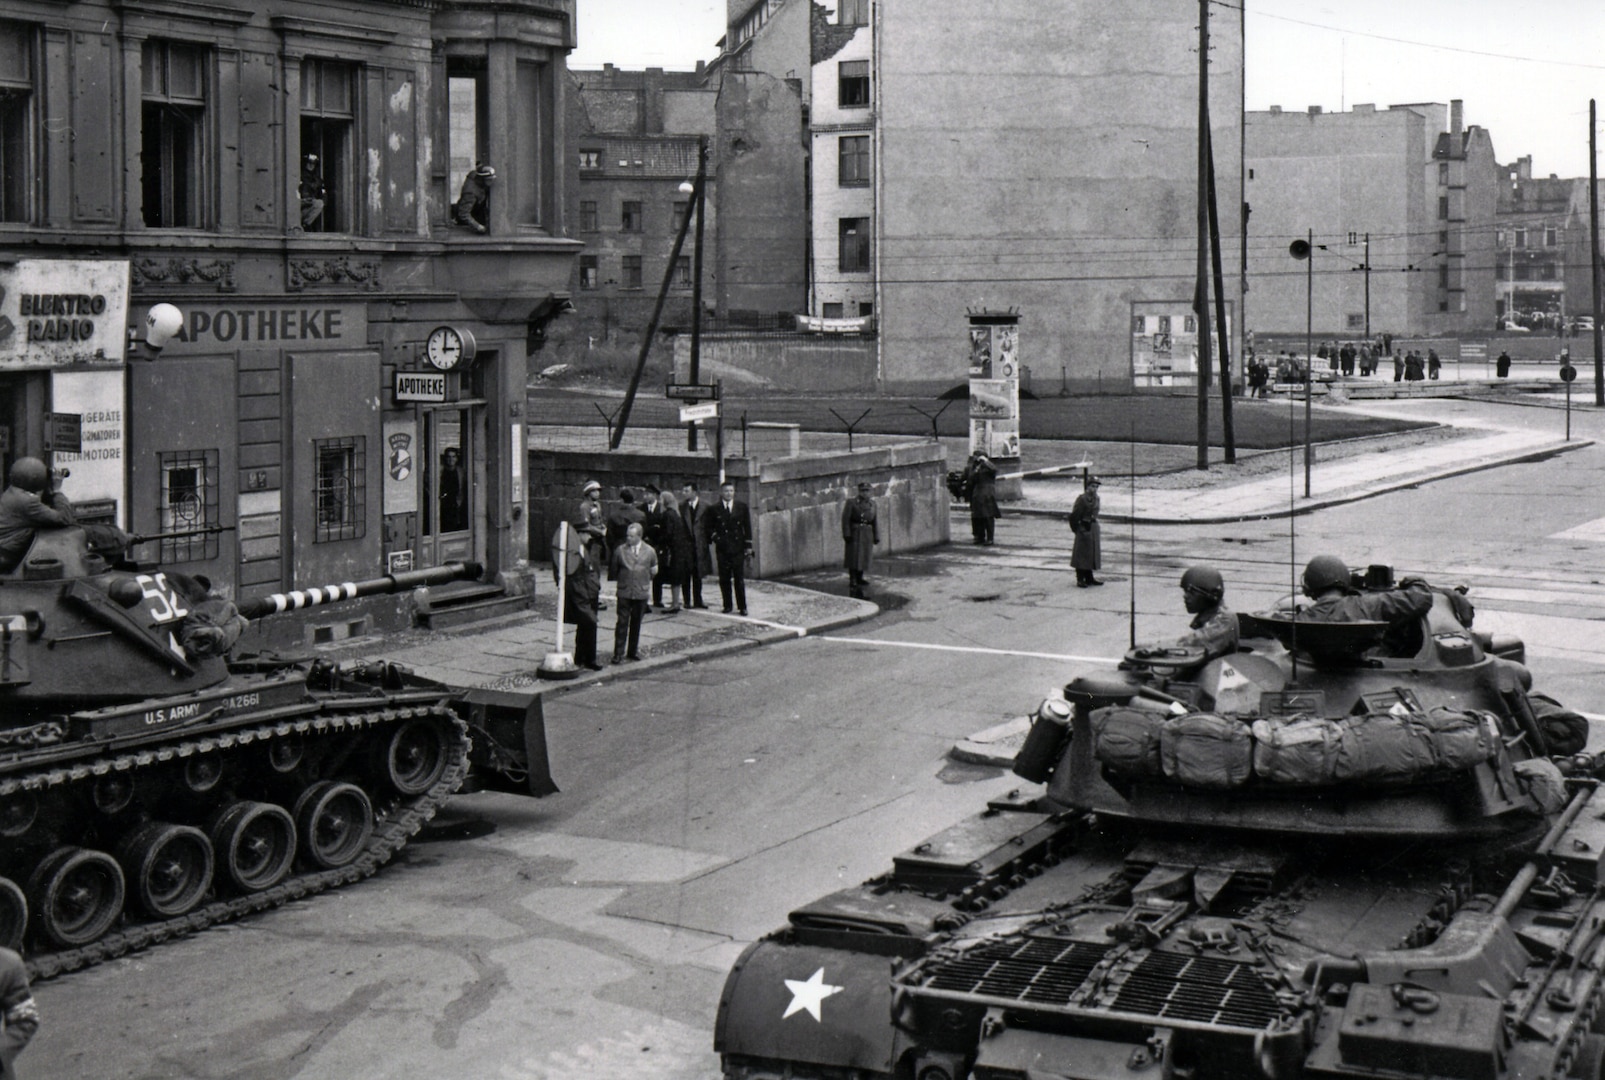 Soldiers from the U.S. Army Berlin Command face off against police from the former East Germany during one of several standoffs at Checkpoint Charlie in 1961. On several occasions that year, a U.S. quick reaction force of tanks and infantry Soldiers stood watch as armed military policemen escorted U.S. personnel across the border into East Berlin. (U.S. Army photo)